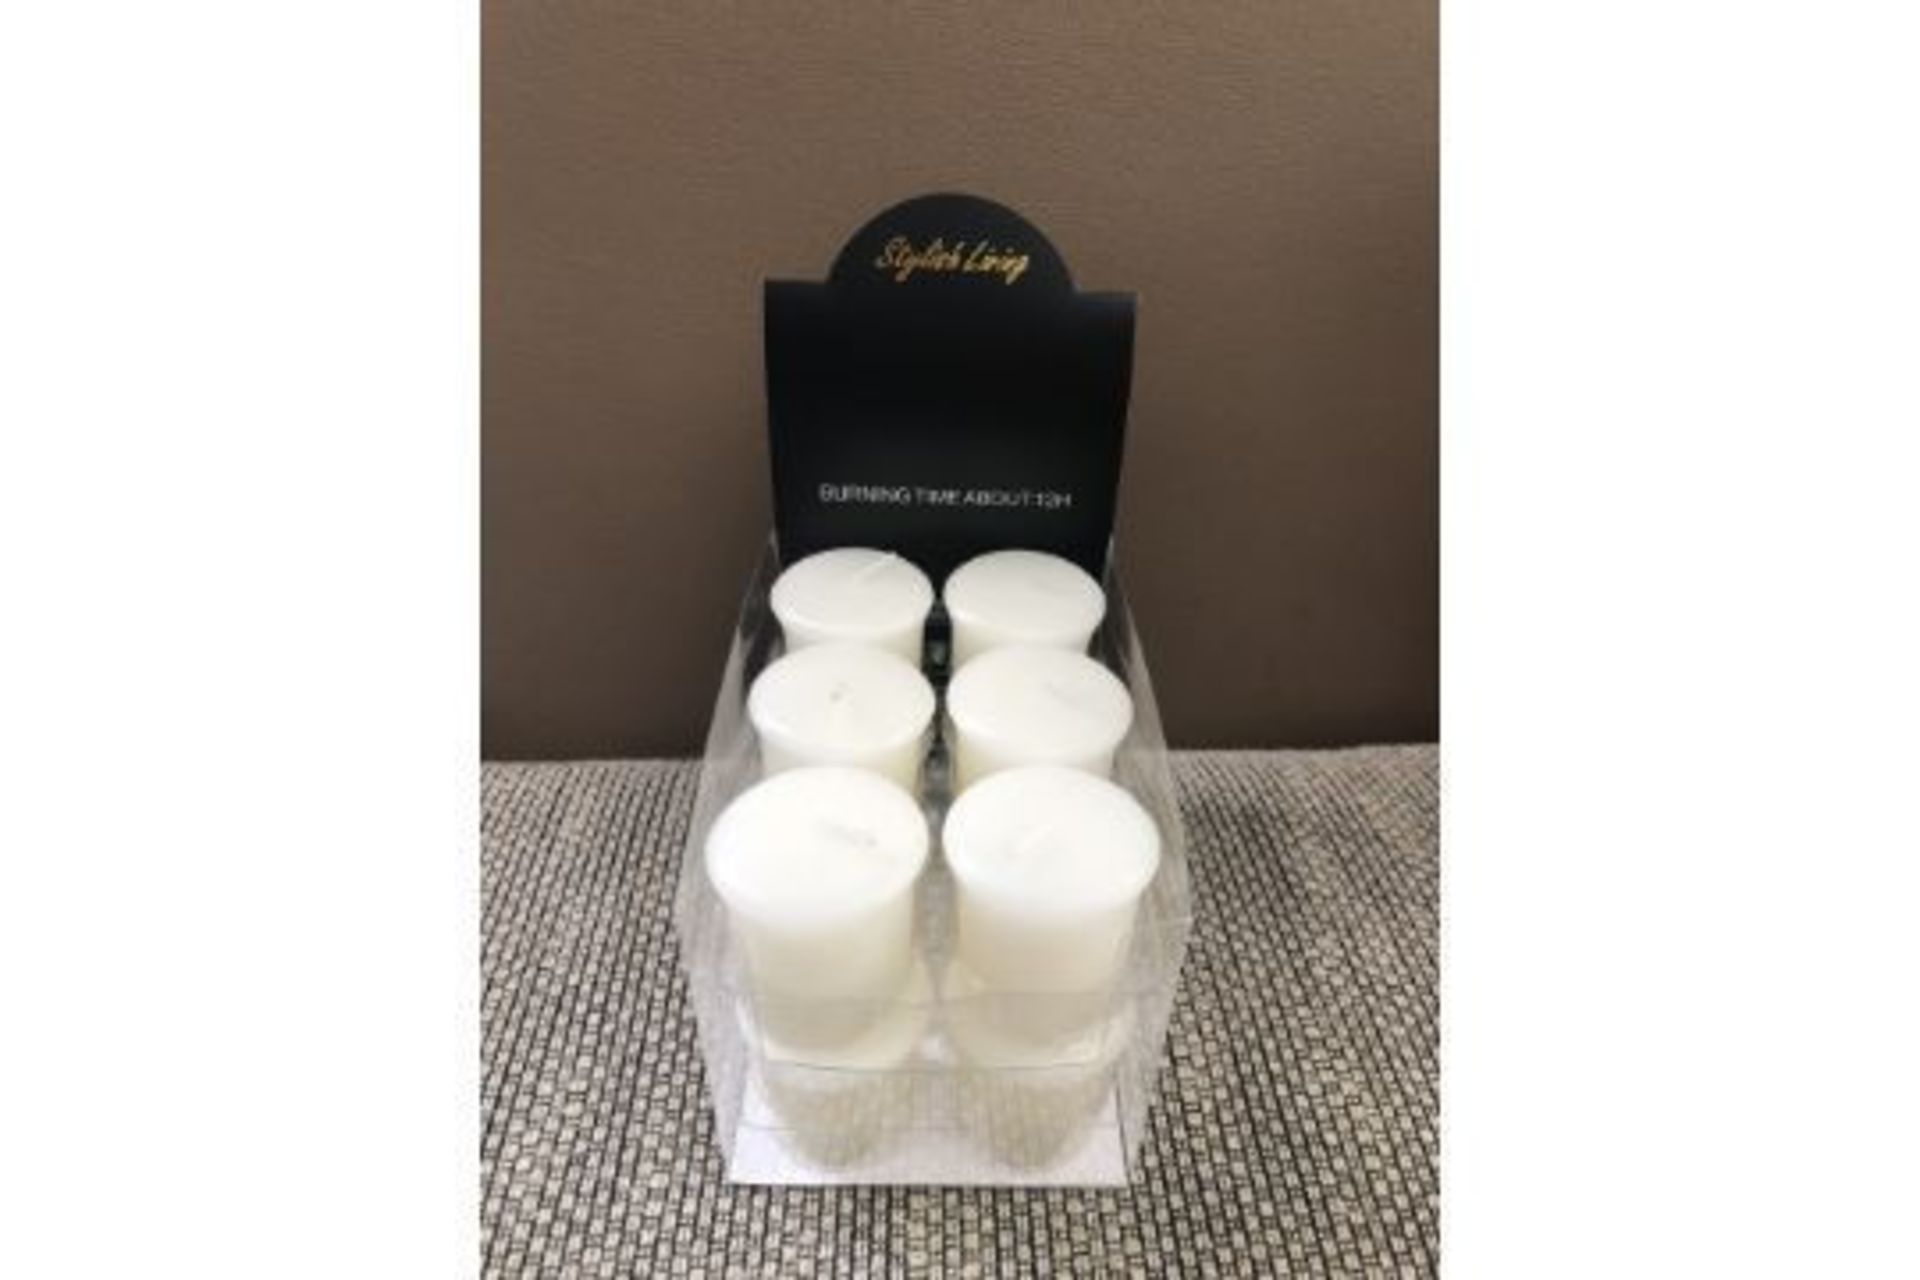 Pack Of 12 Votive Ivory Candles